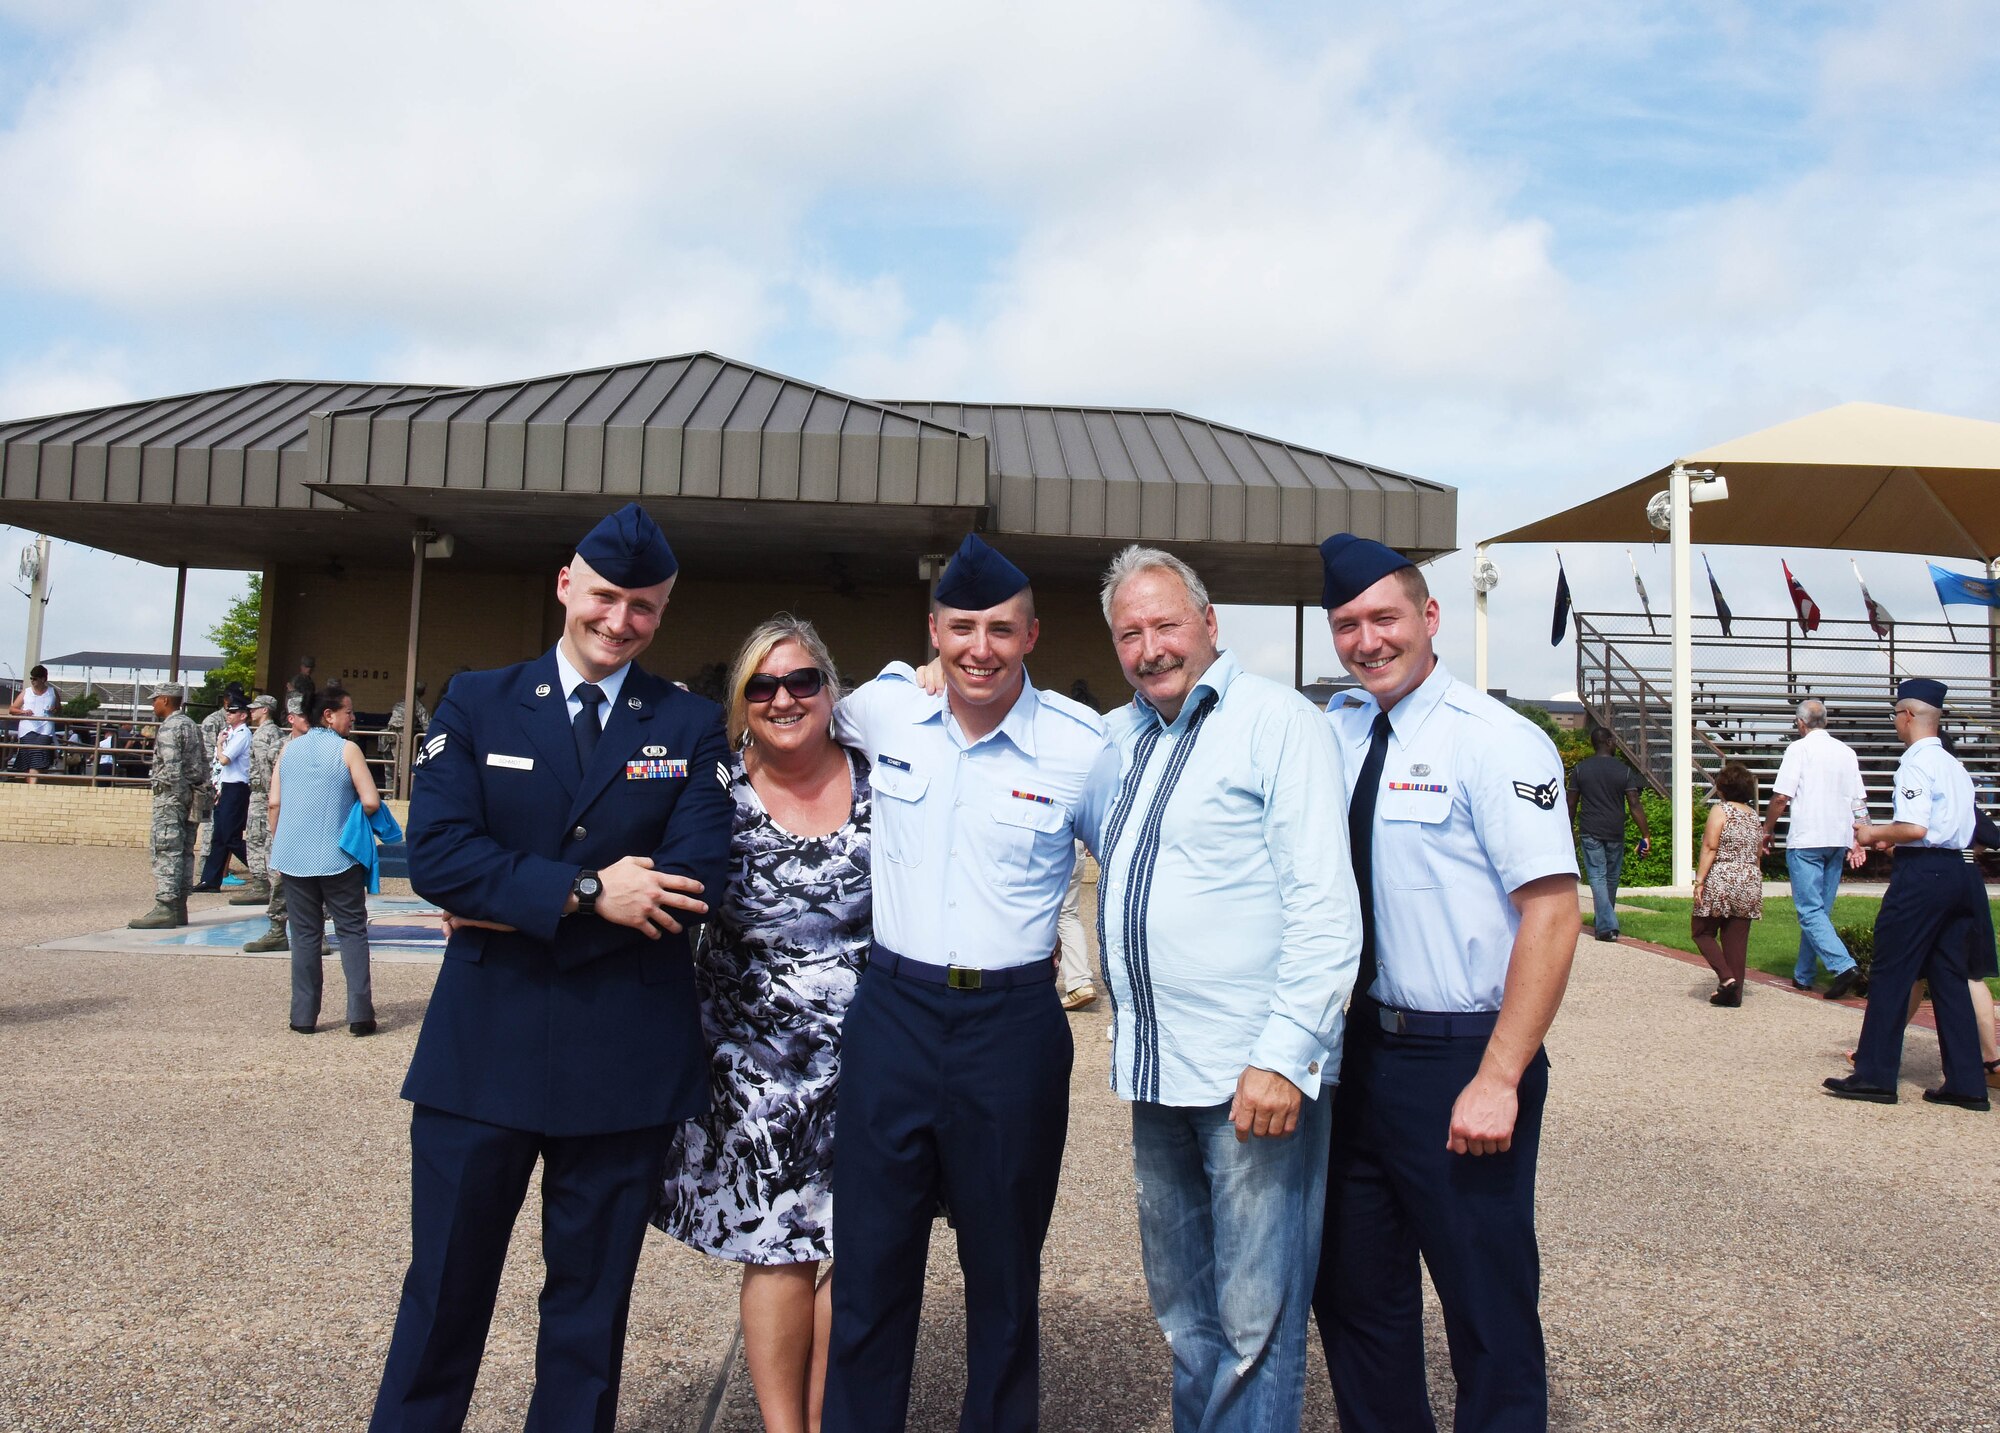 The Schmidt family poses for a family photograph after a basic training graduation at Joint Base San Antonio, Texas, June 26. Pictured from left to right are Kendrick, Anne, Logan, Gene and Collin Schmidt. (Courtesy photo Airman 1st Class Collin Schmidt) 